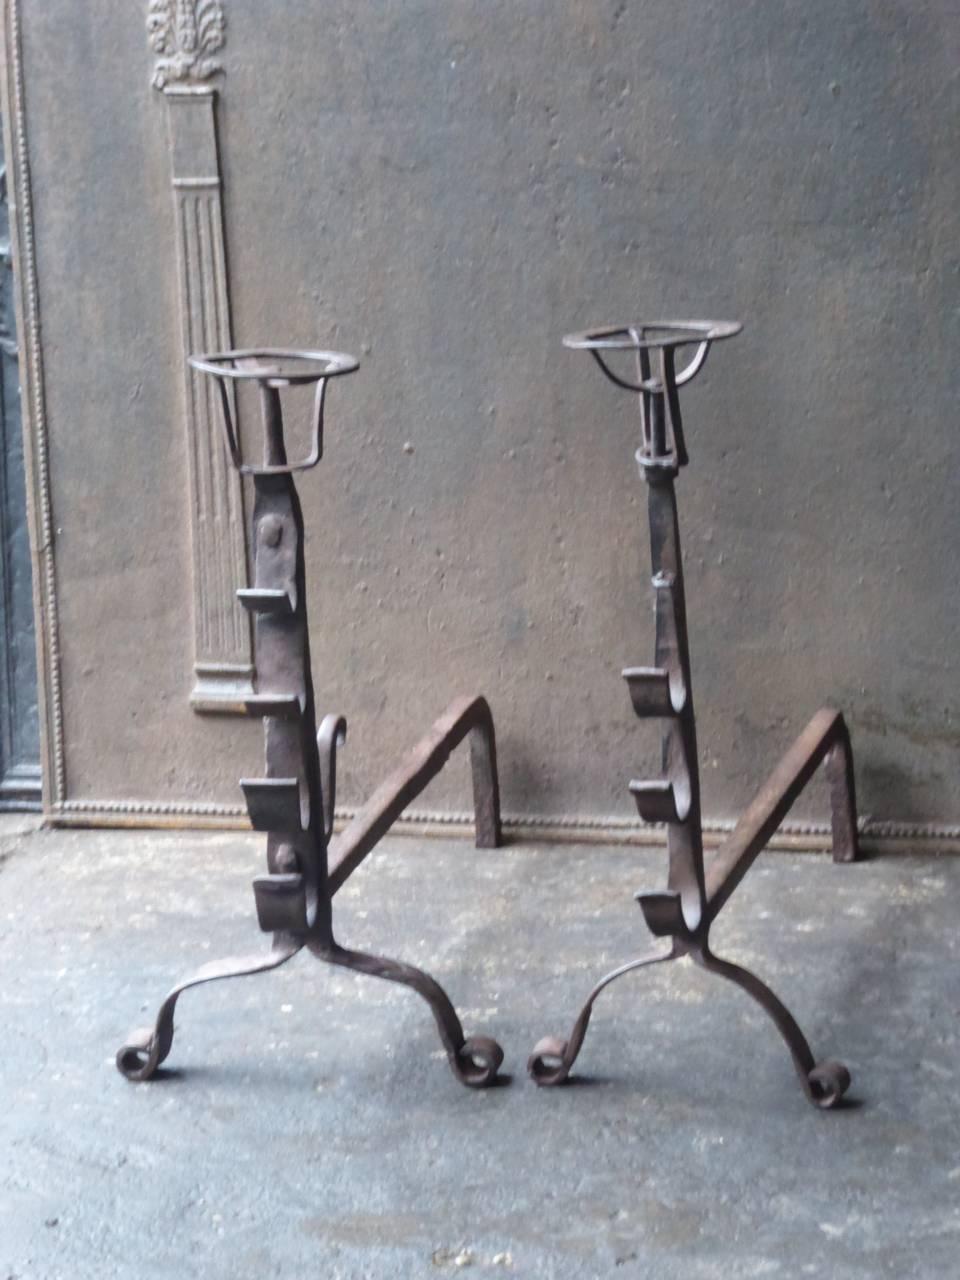 17th-18th century French Gothic fire dogs made of wrought iron. These French andirons are called 'landiers' in France. This dates from the times the andirons were the main cooking equipment in the house. They had spit hooks to grill meat or poultry